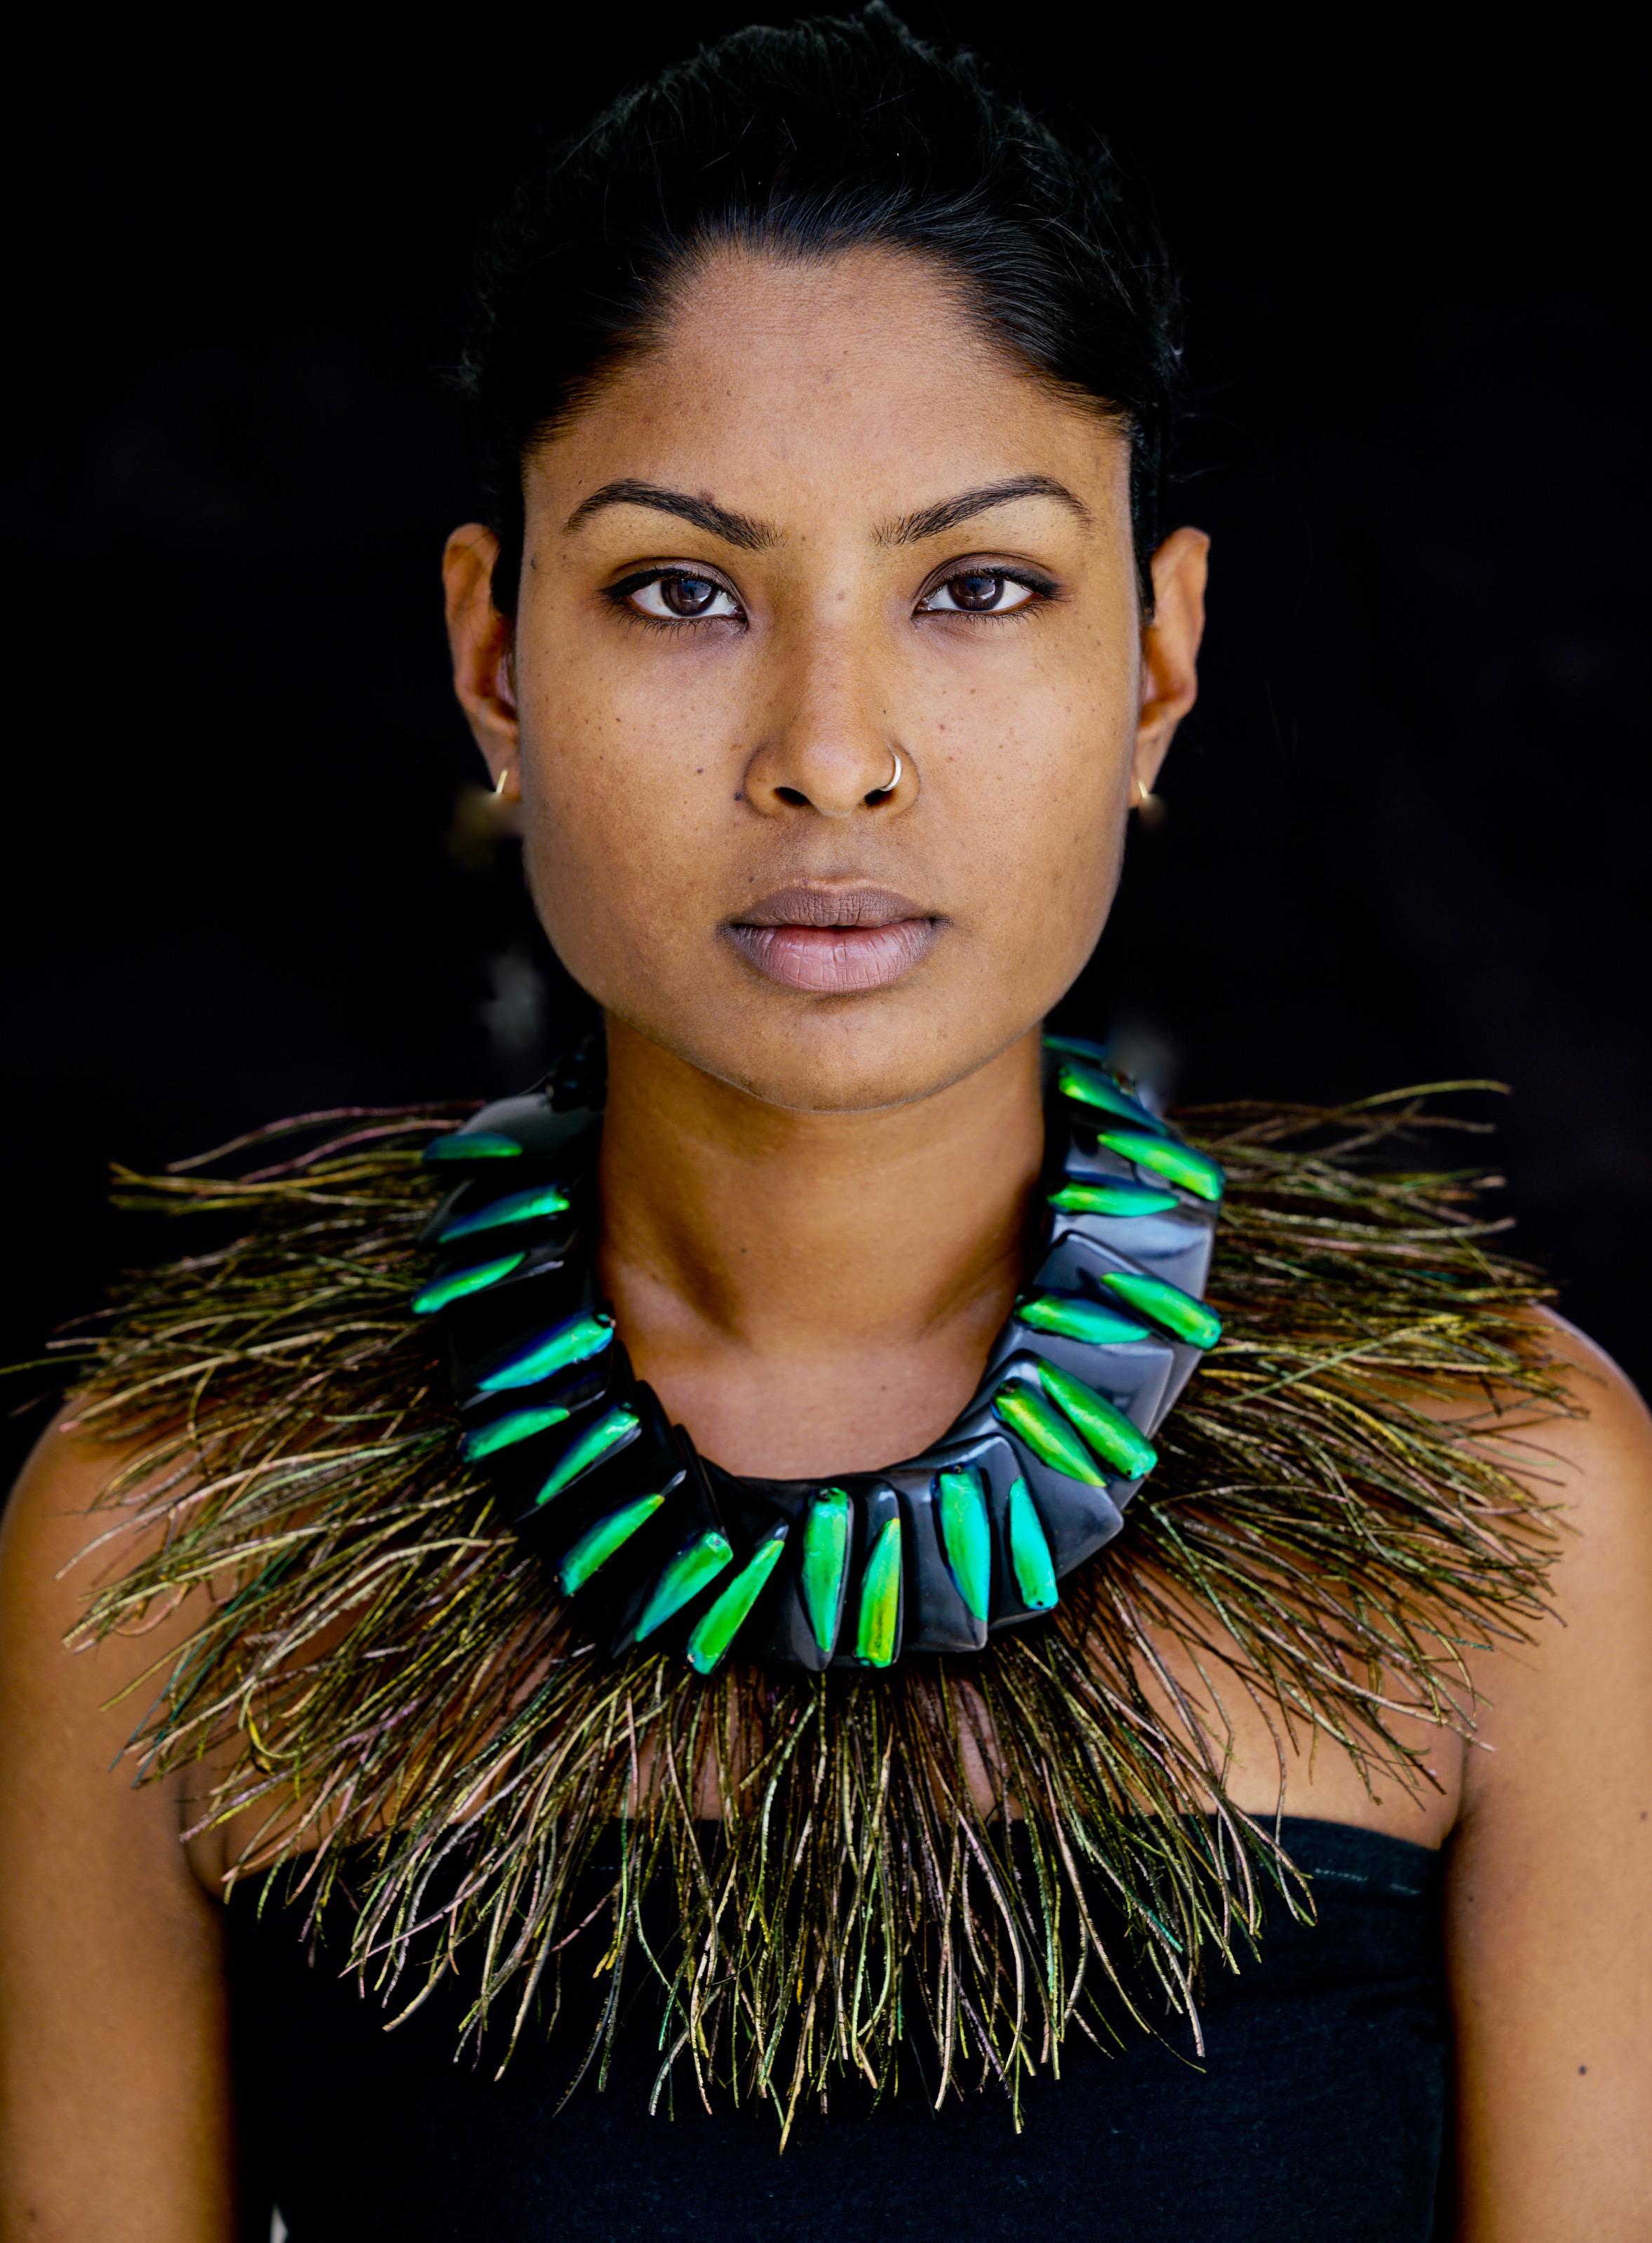 Women's Elytra/Peacock Feathers , Theatrical Statement Necklace by Sylvia Gottwald  For Sale